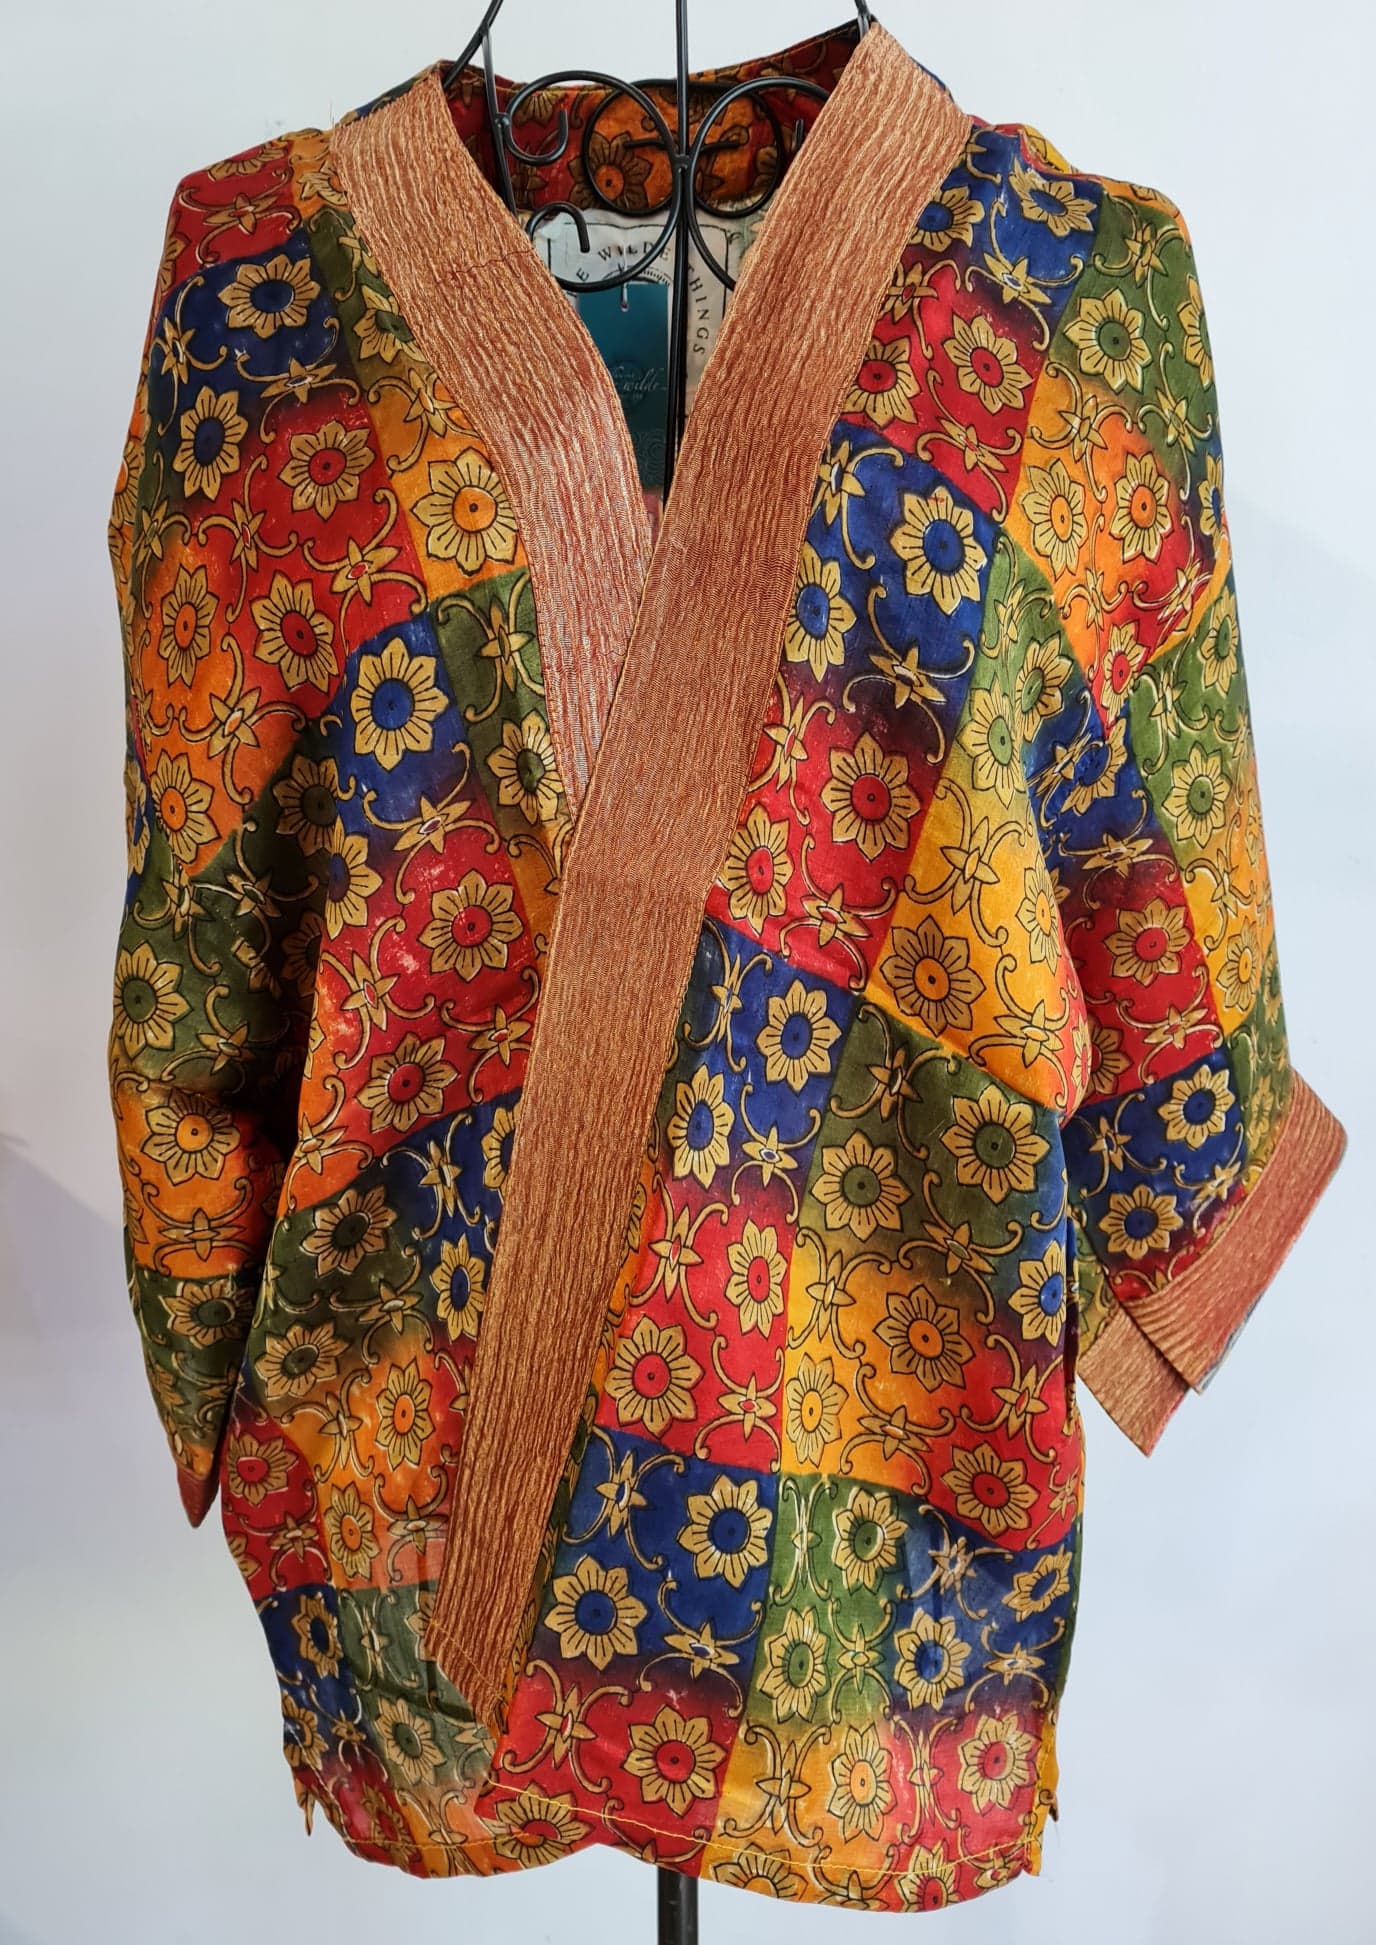 Regalia muse jacket crossed over a wire mannequin, squares in blue, green, red and yellow make up the jacket. On top of the squares are a light golden floral pattern in a geometric fashion. the jacket has a textured red silk trim. Regalia